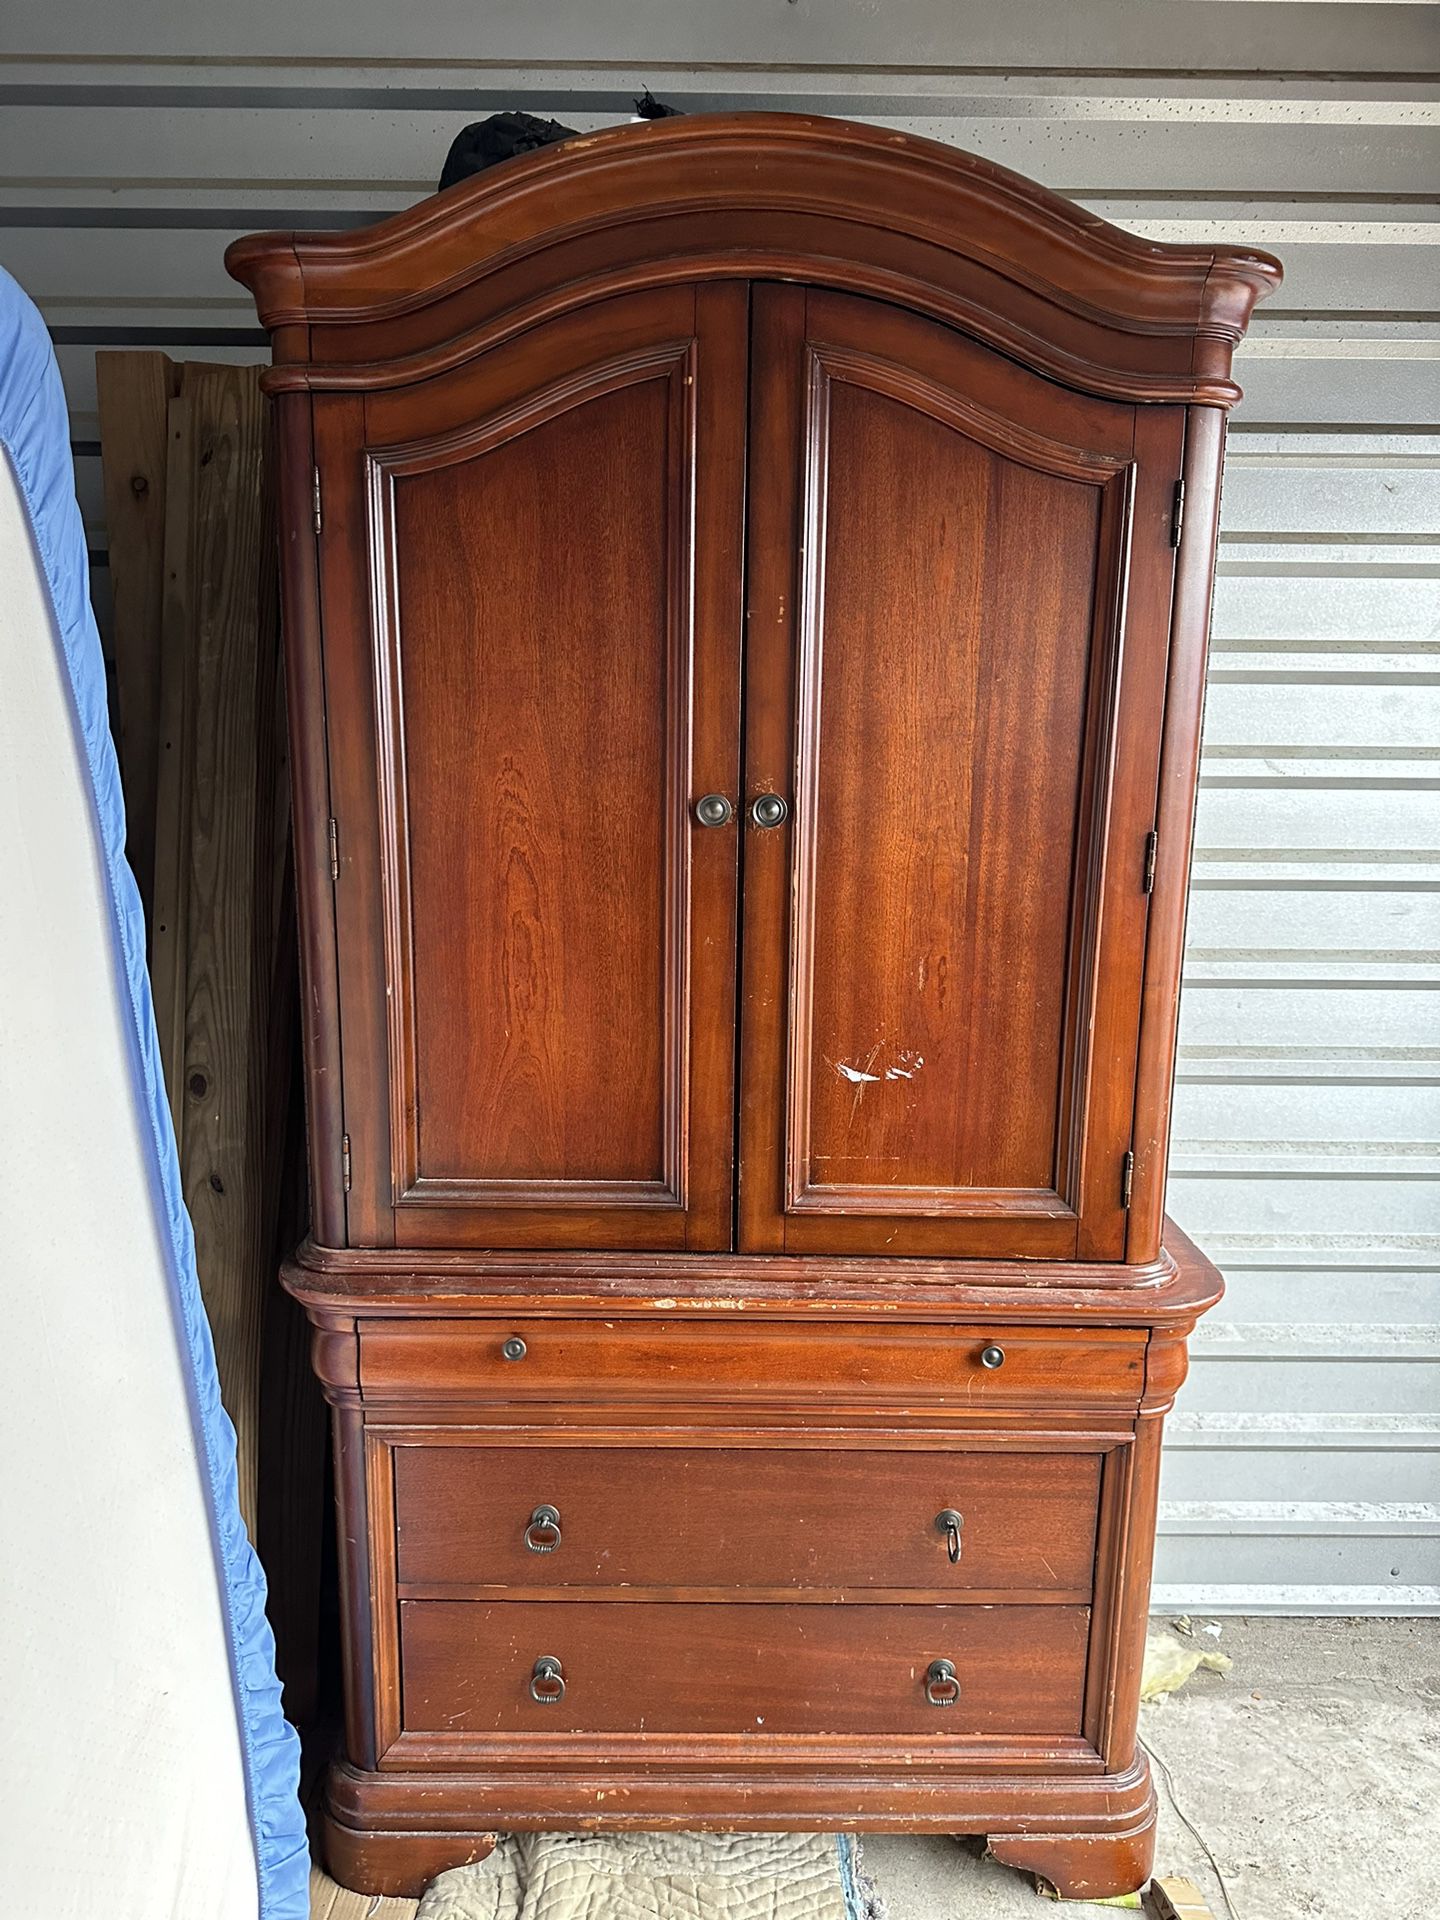 Real Wood Armoire 